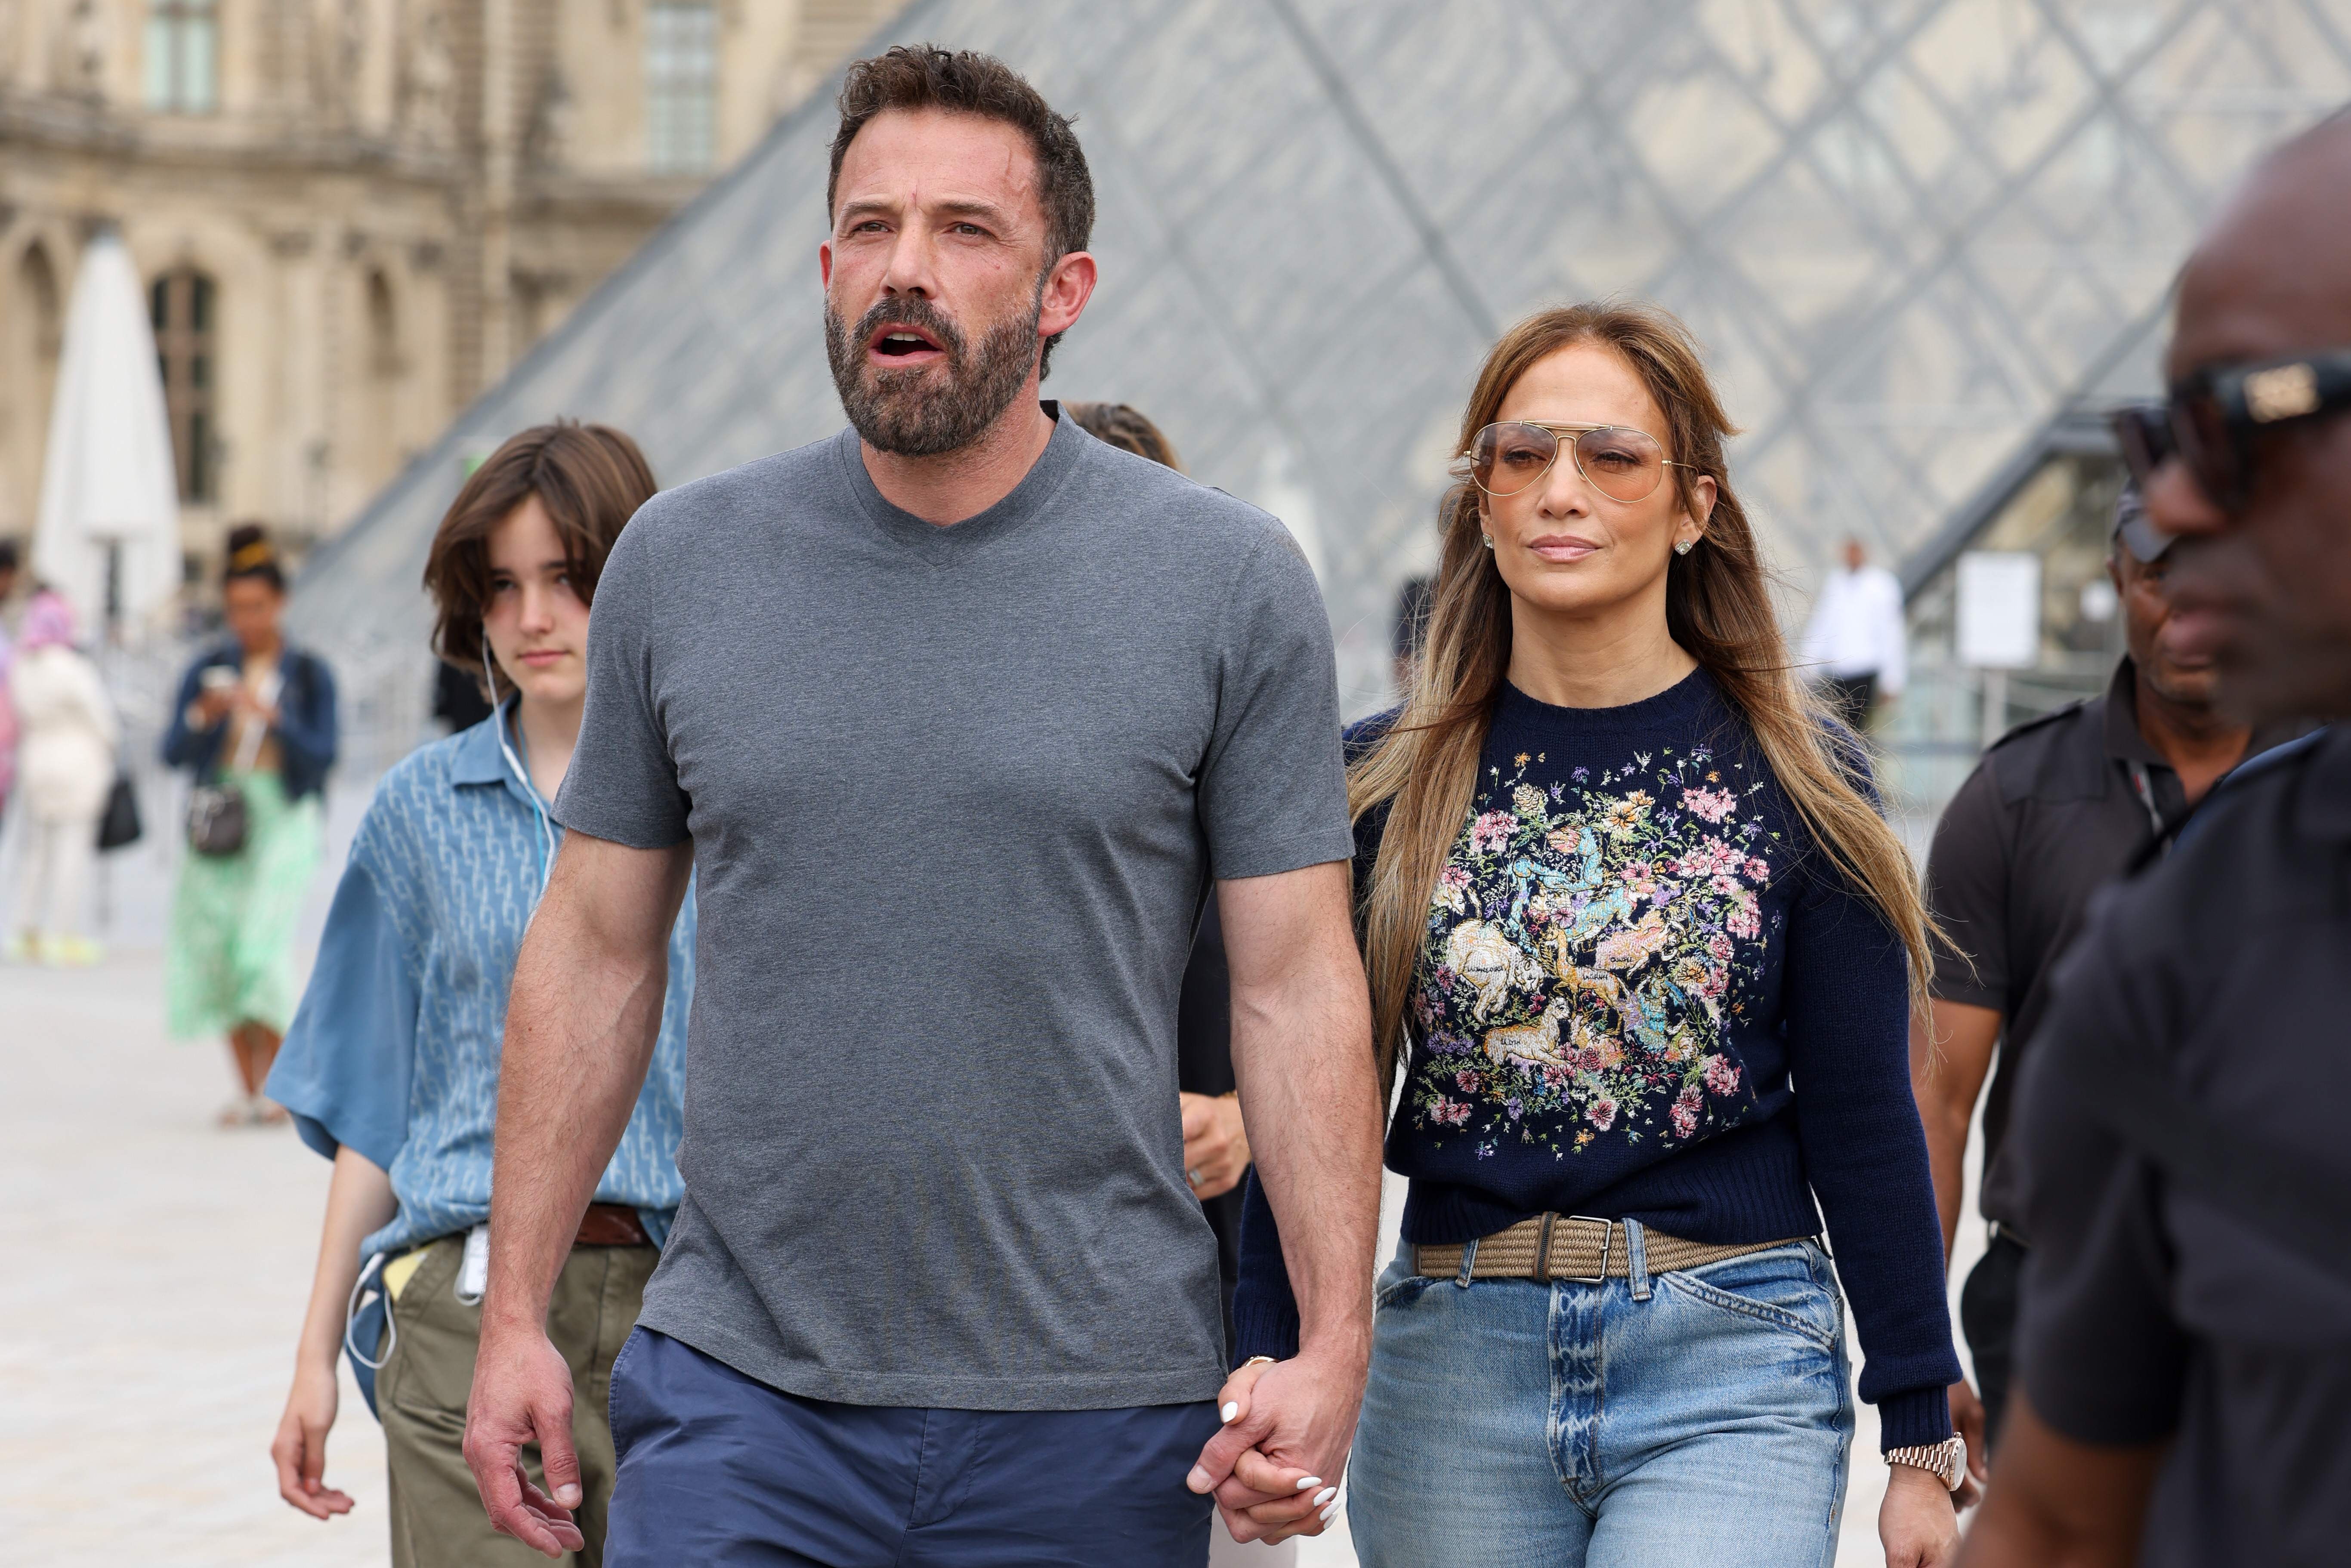 Jennifer Lopez and Ben Affleck are seen at the Louvre Museum on July 26, 2022 in Paris, France | Source: Getty Images